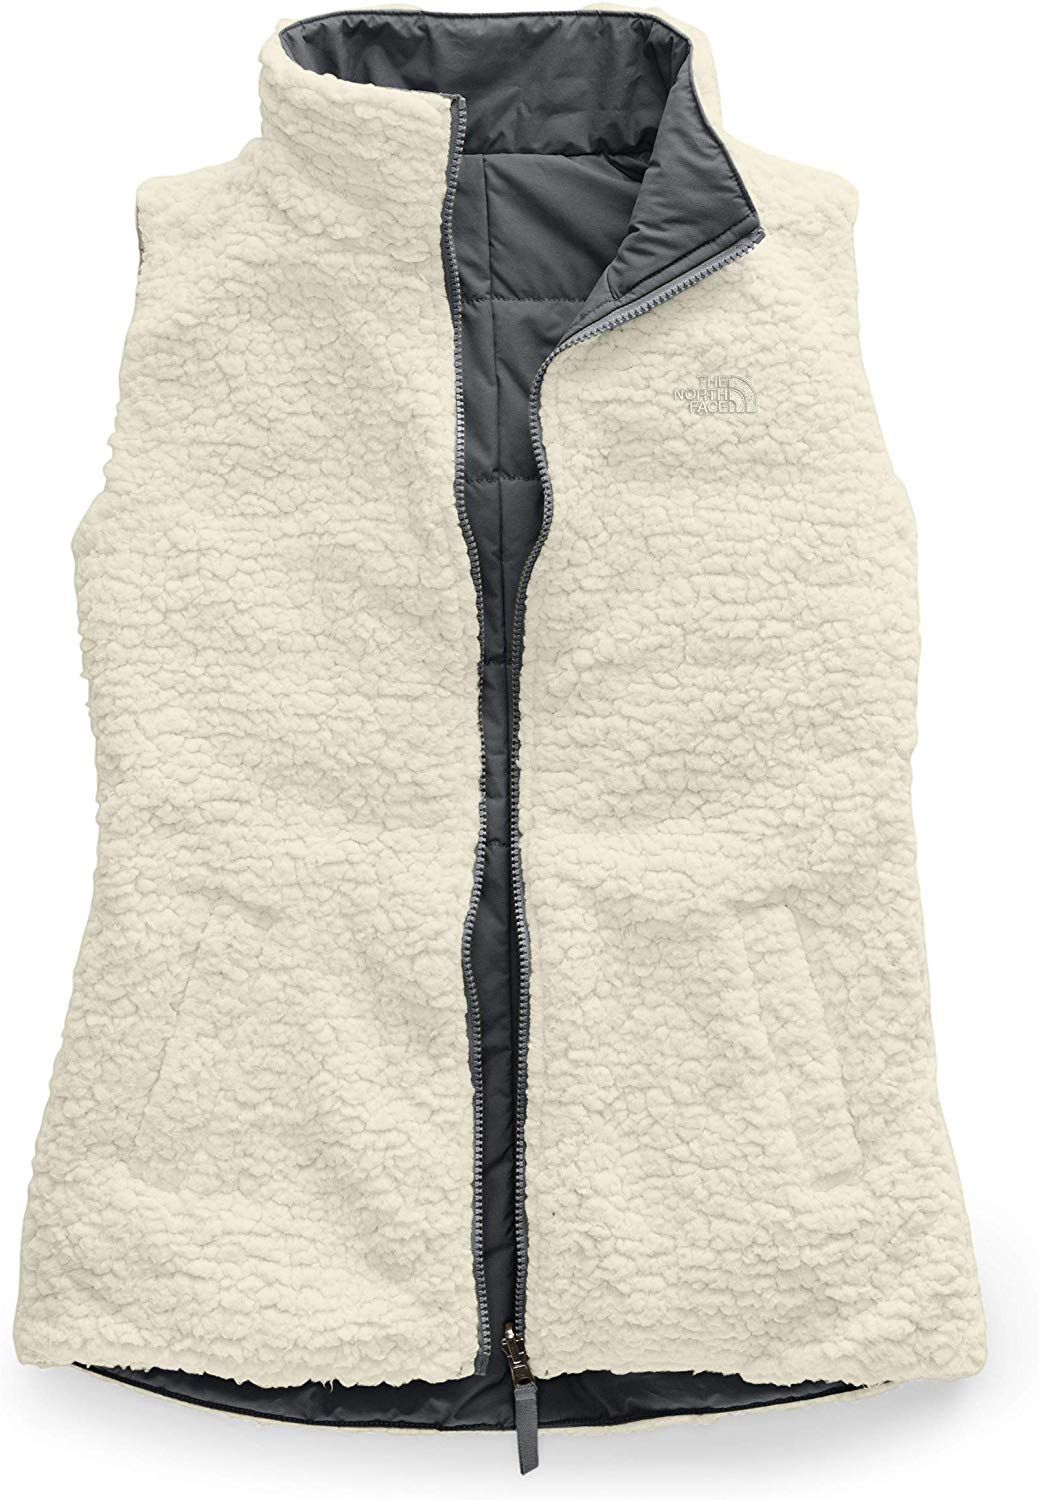 The North Face Nf0a3iu1 WOMEN’S MERRIEWOOD REVERSIBLE VEST size M5